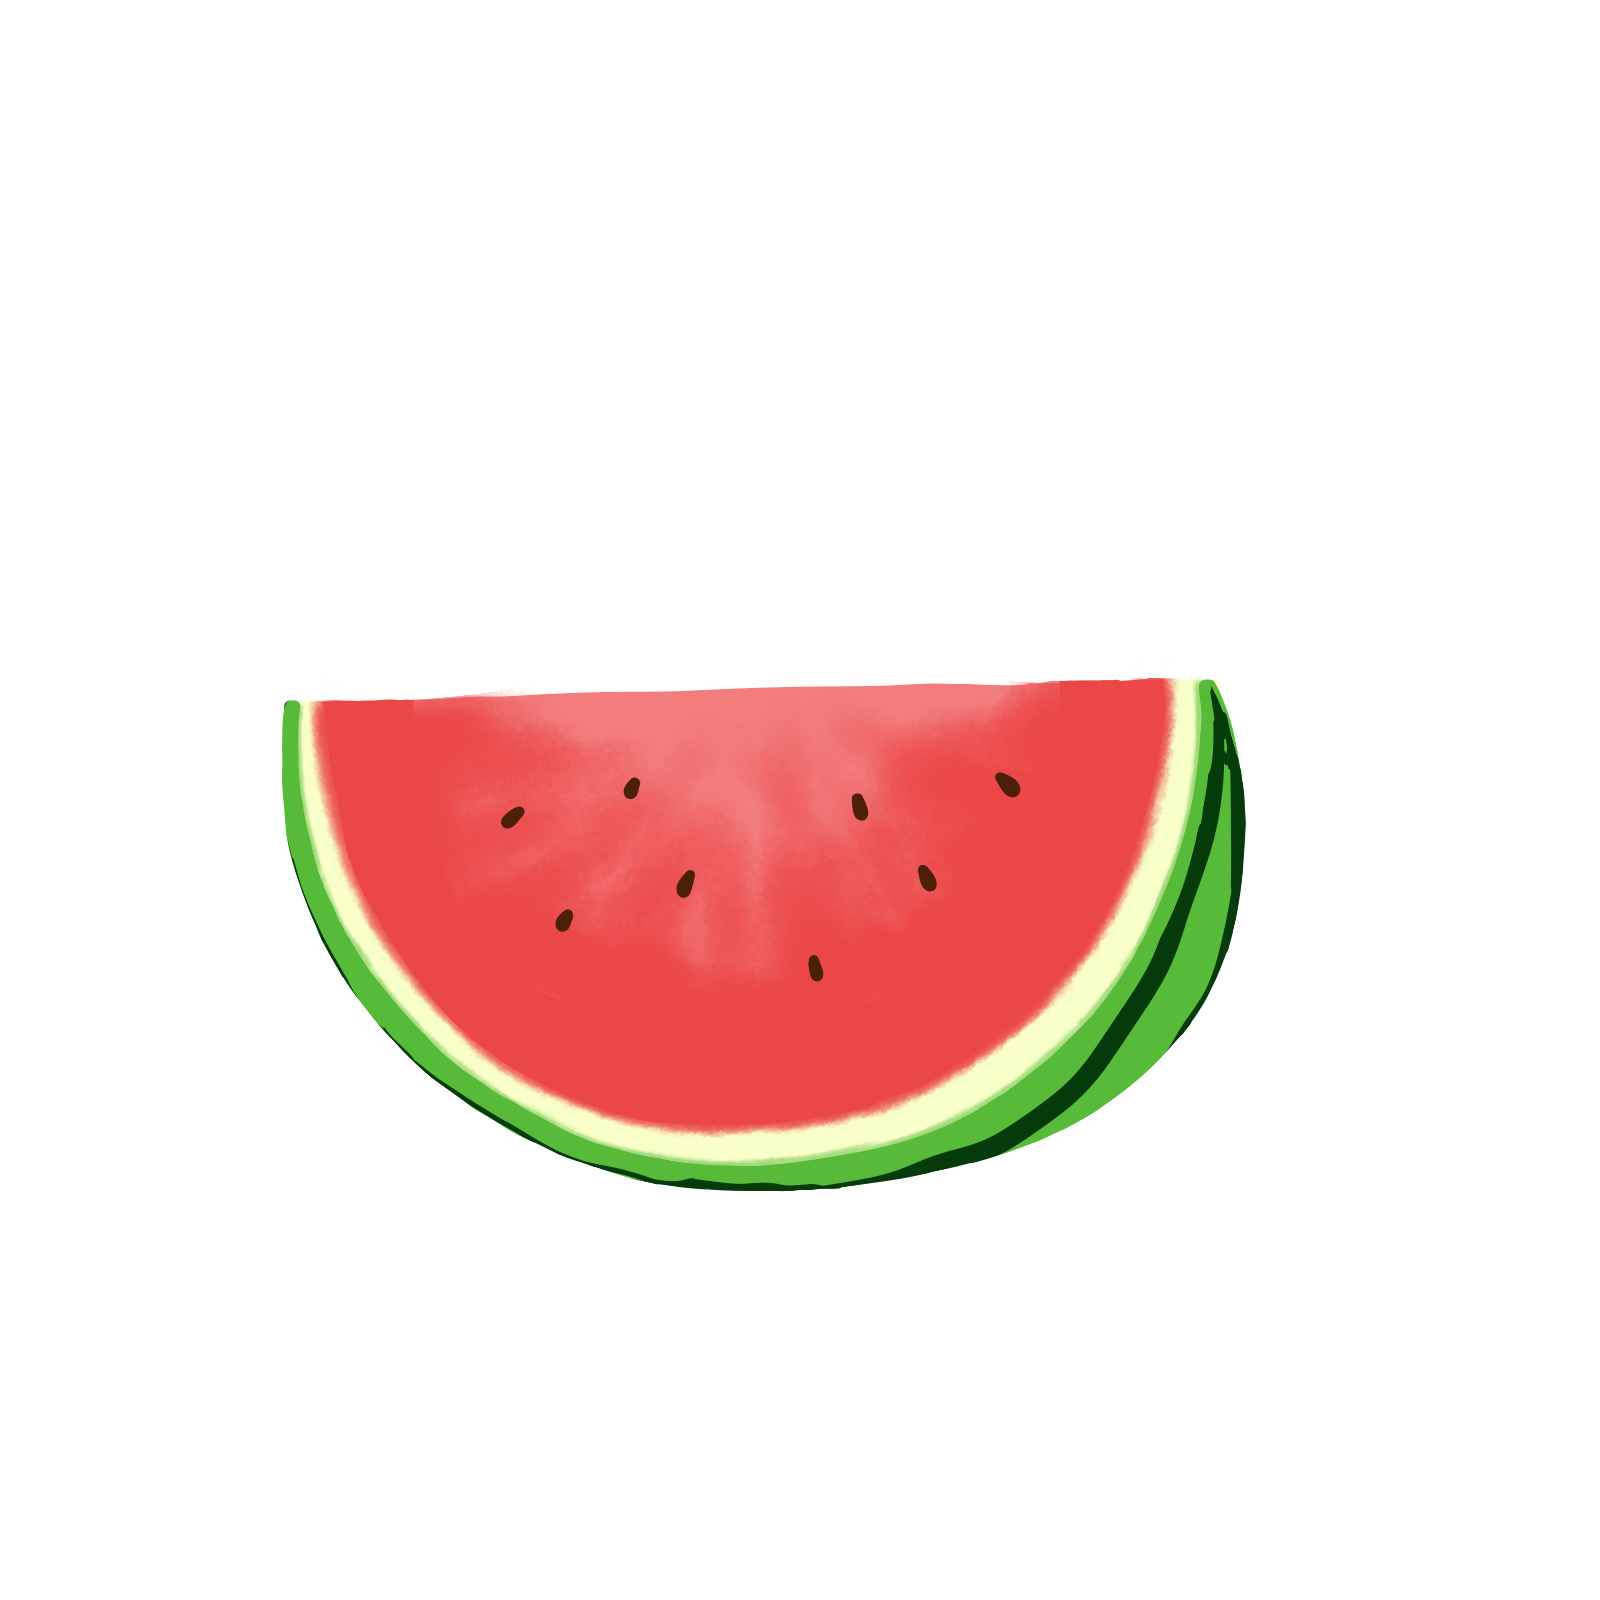 How to draw a watermelon MediBang Paint the free digital painting